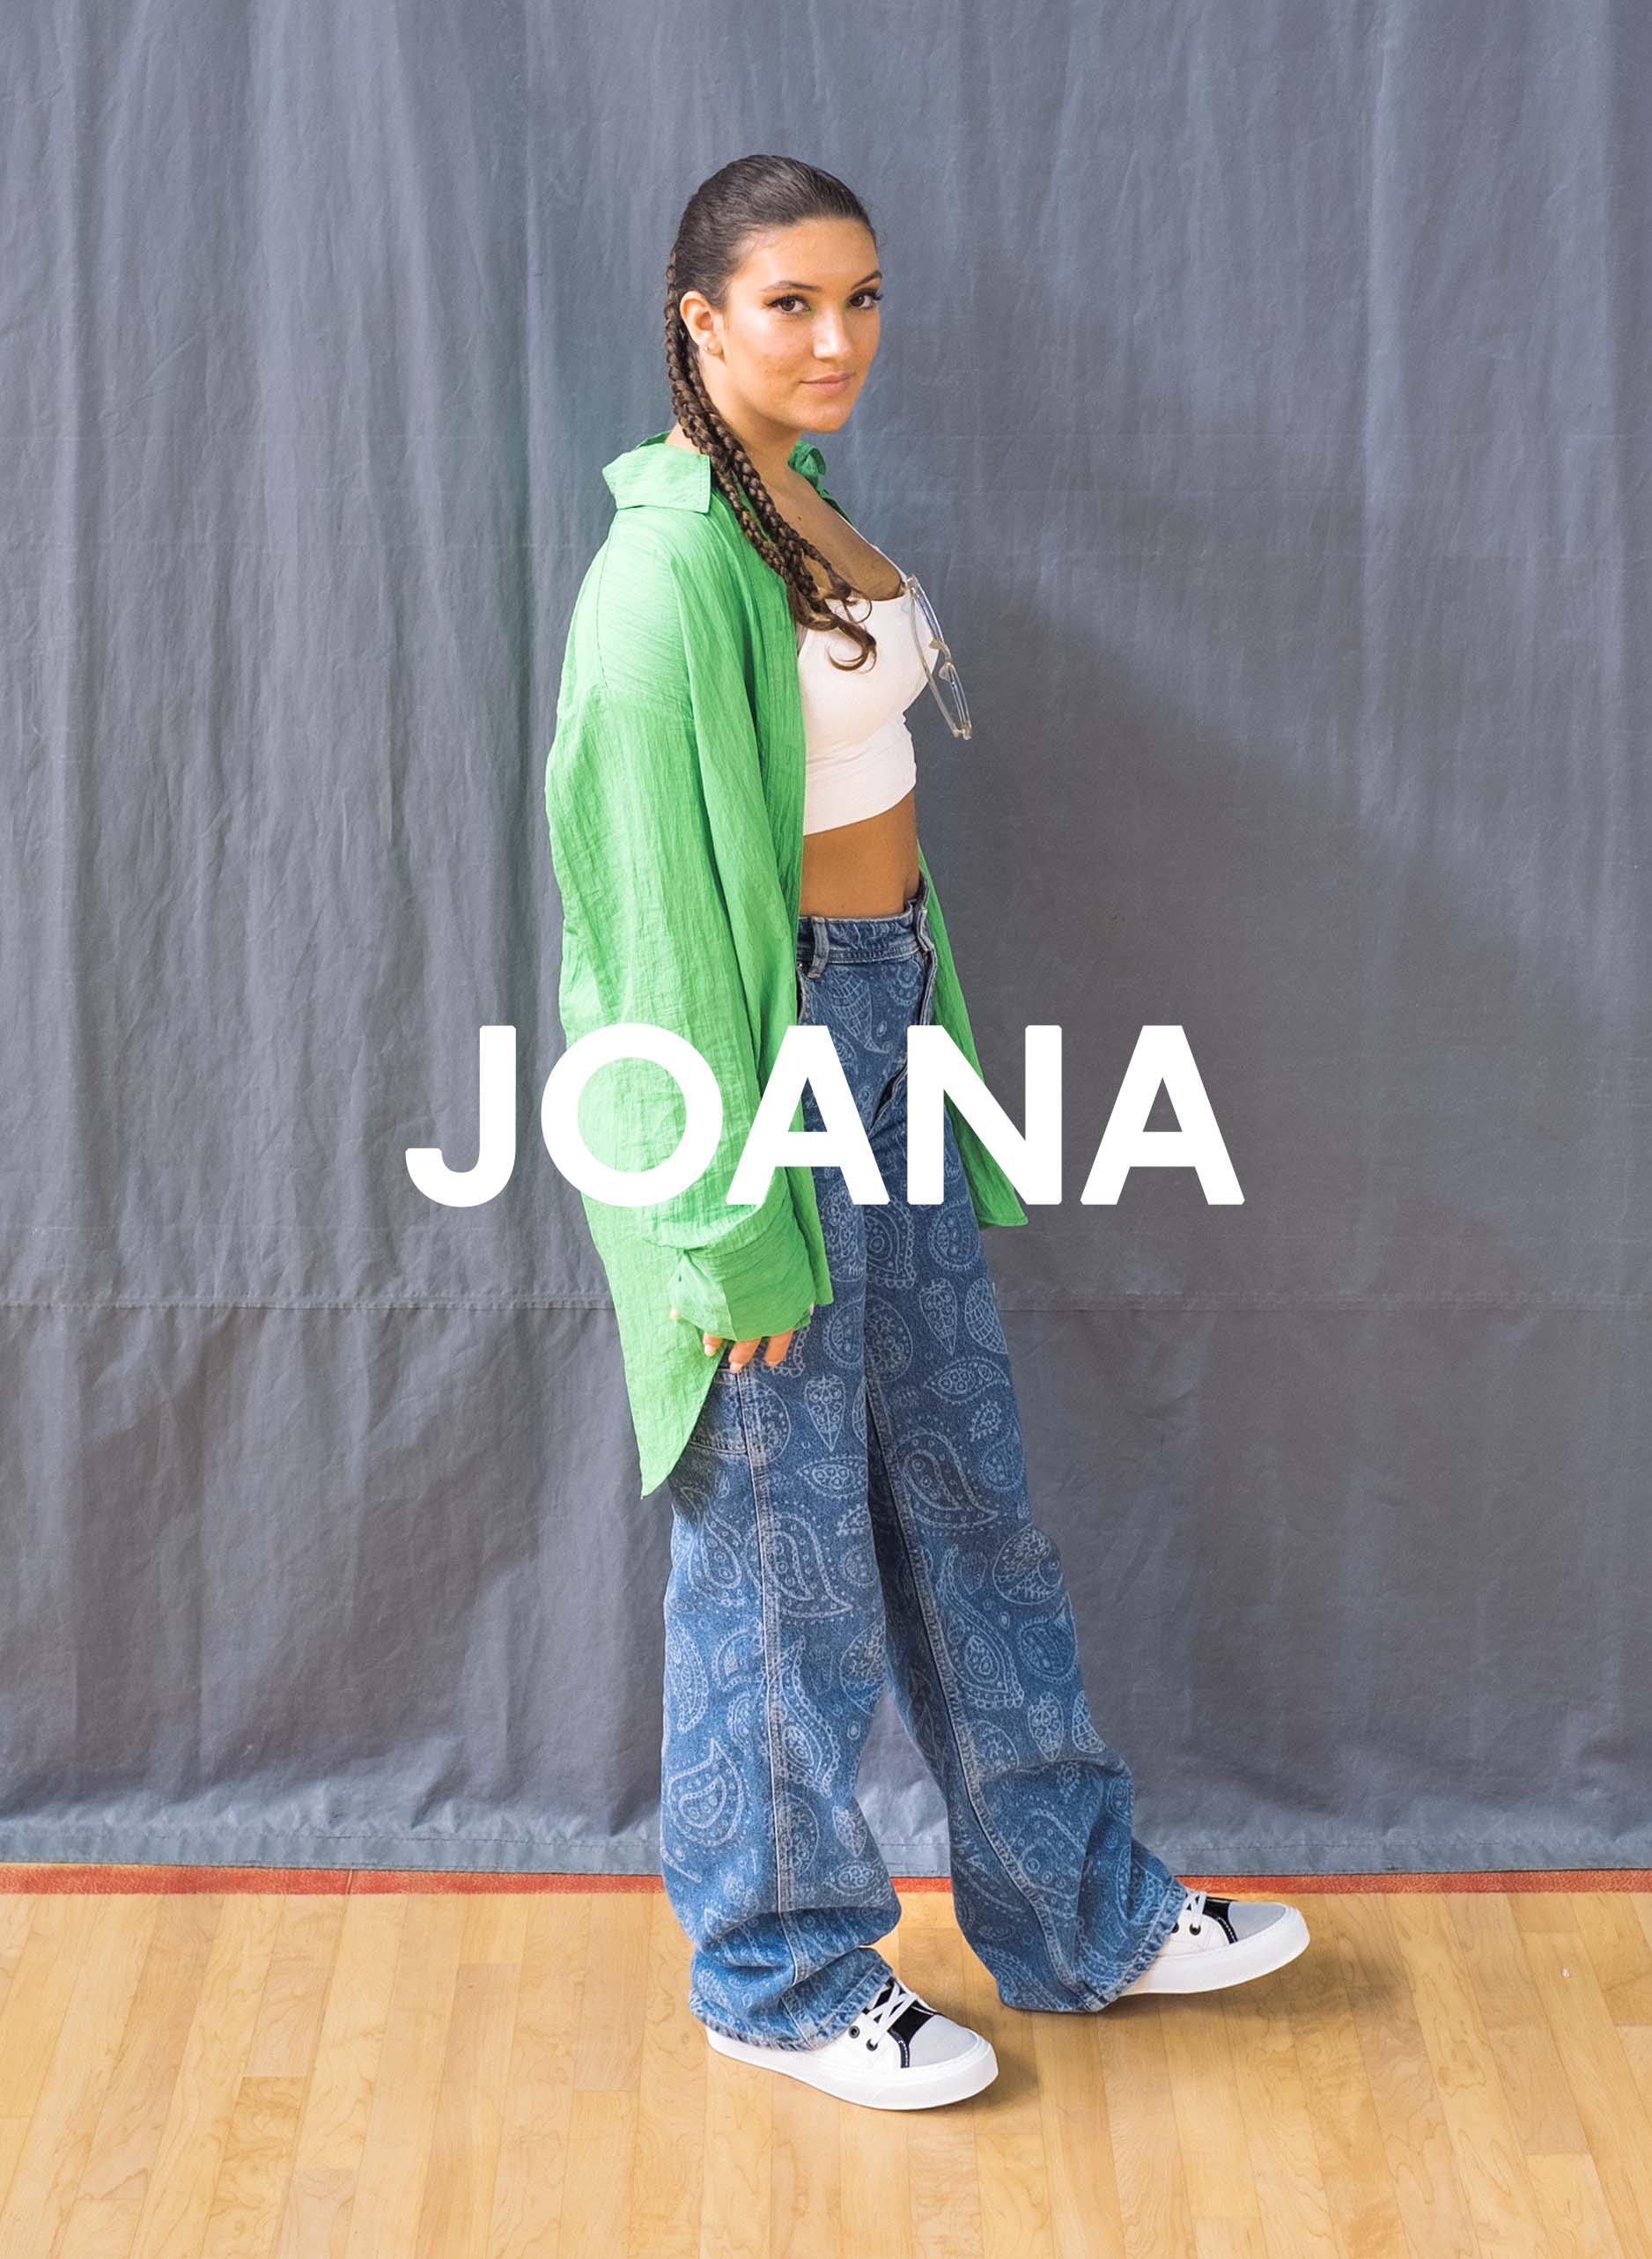 Joana in a green shirt and jeans standing on a wooden floor, wearing Diverge sneakers, promoting social impact and custom shoes throught the imagine project.  